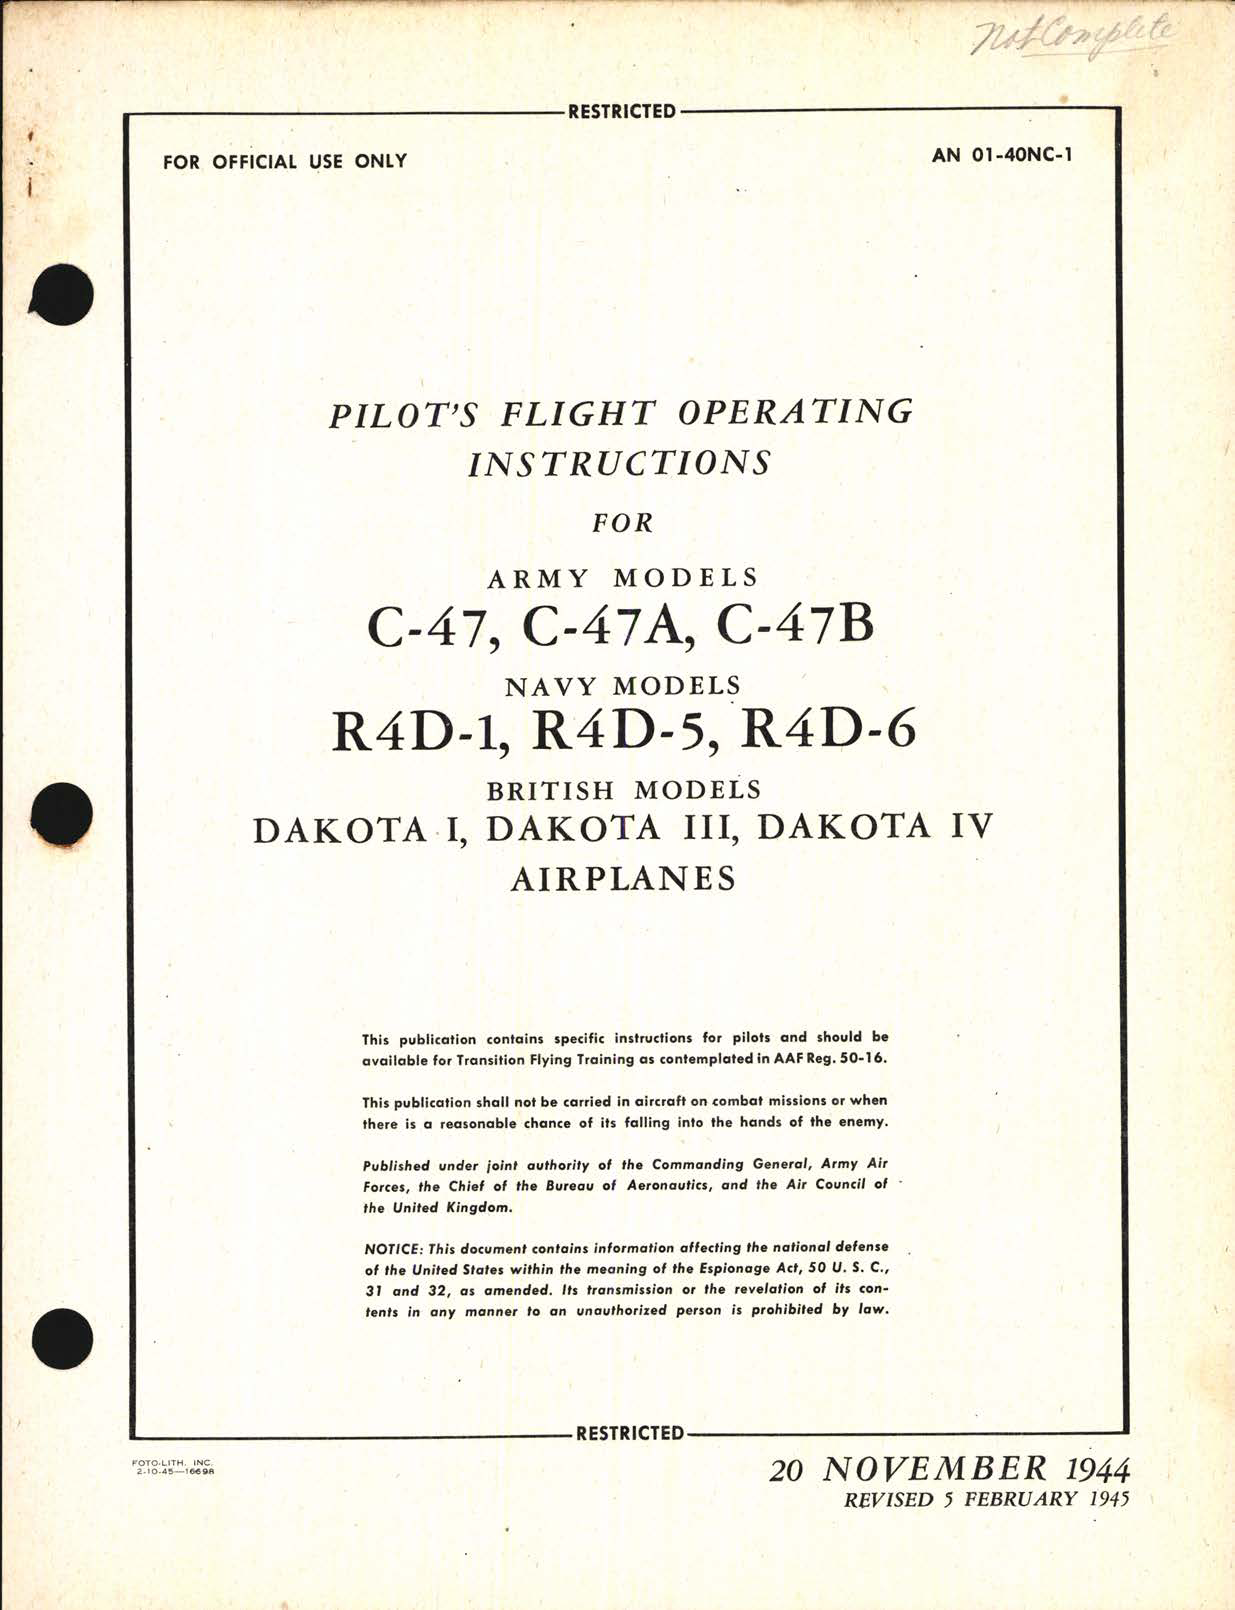 Sample page 1 from AirCorps Library document: Pilot's Flight Operating Instructions for C-47, C-47A, C-47B, R4D-1, R4D-5, and R4D-6